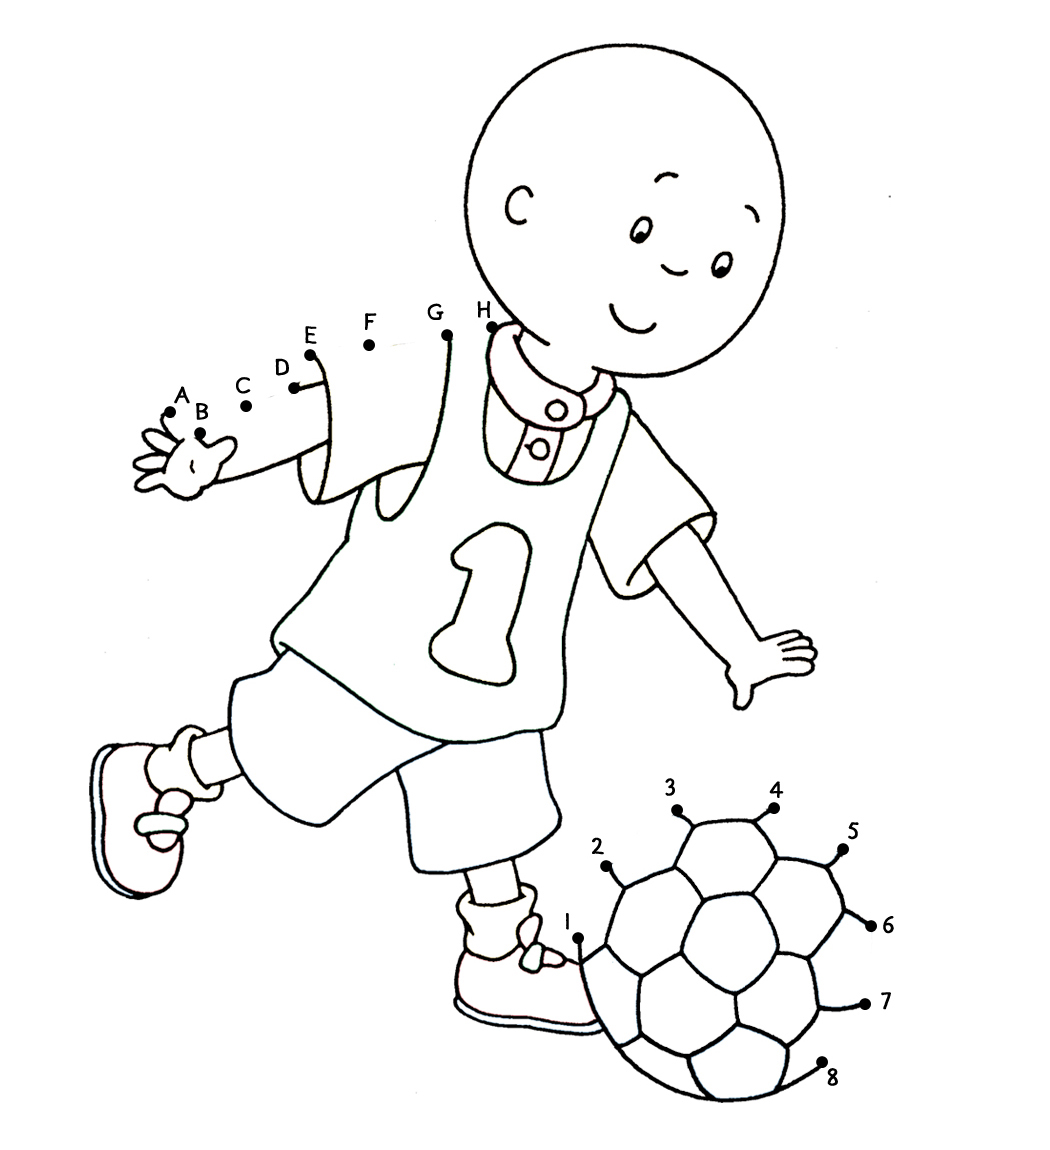 caillou soccer ball coloring pages - photo #5